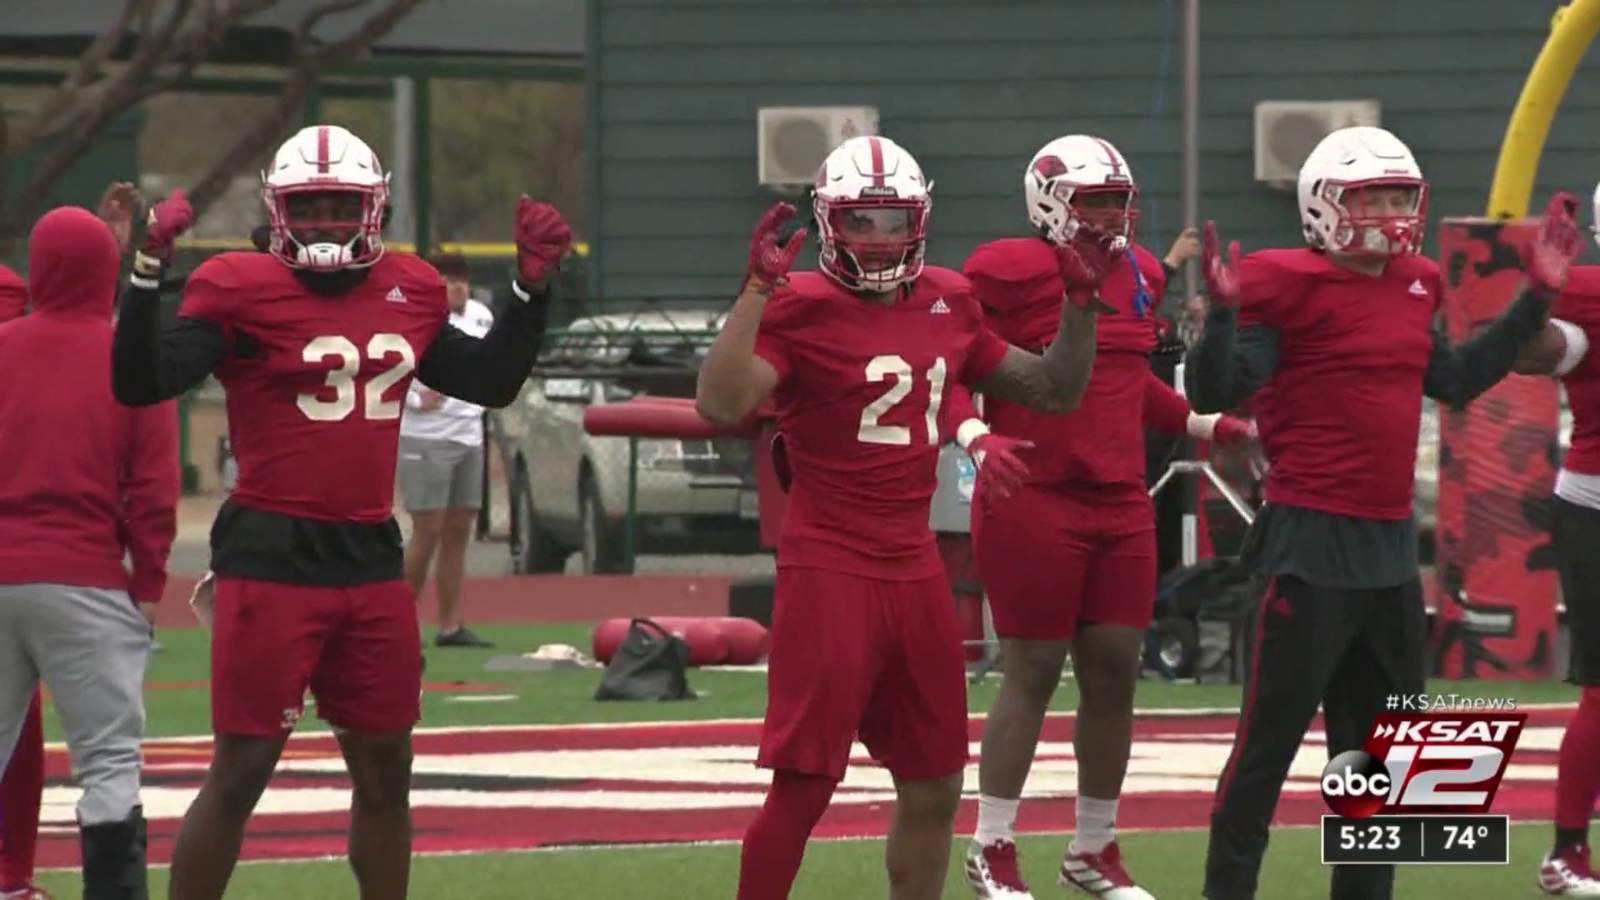 UIW football wraps up second week of practice, excited to start spring schedule